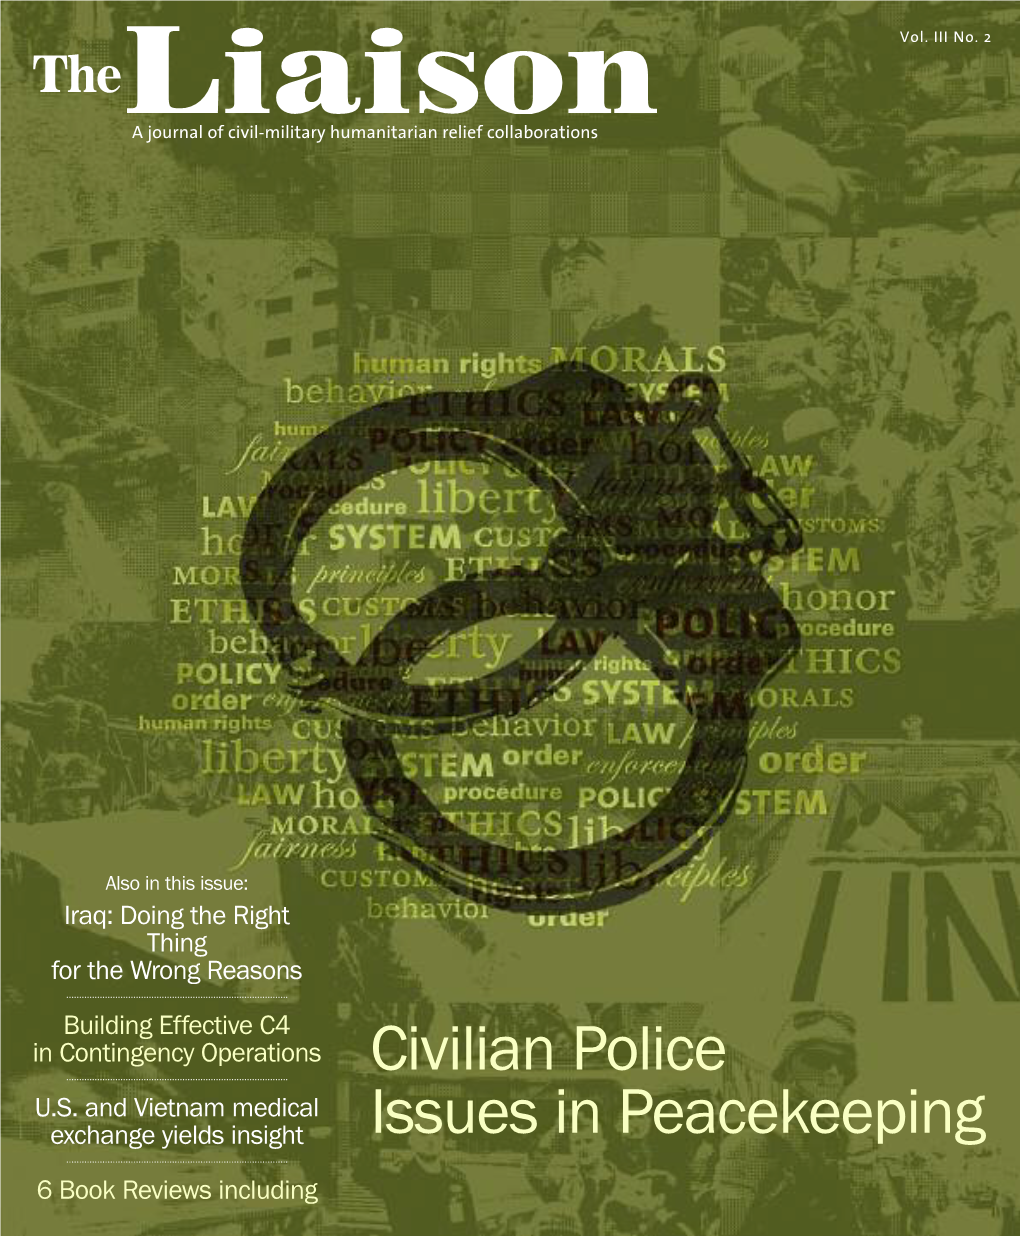 Civilian Police Issues in Peacekeeping 6 an Interview with Michael O’ Rielly | by Robin Hayden